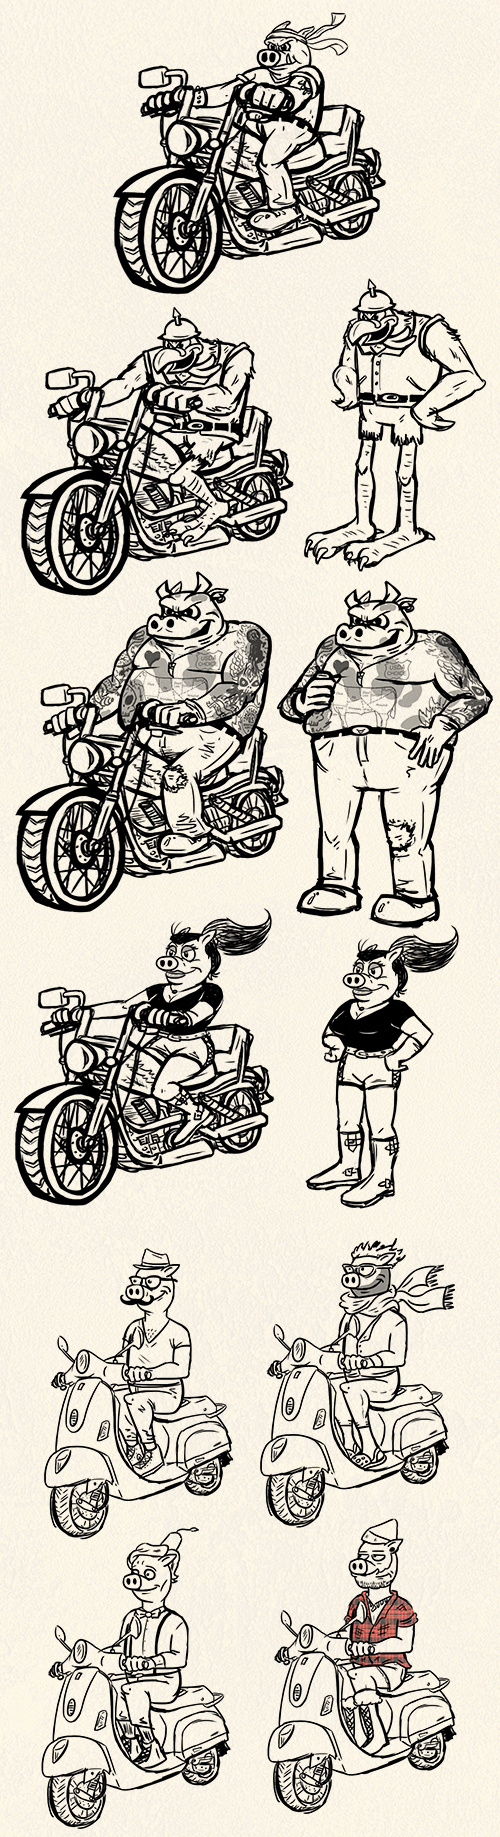 commercial pig chicken cow BBQ biker motorcycle drawings Hipster moped Doctor Who